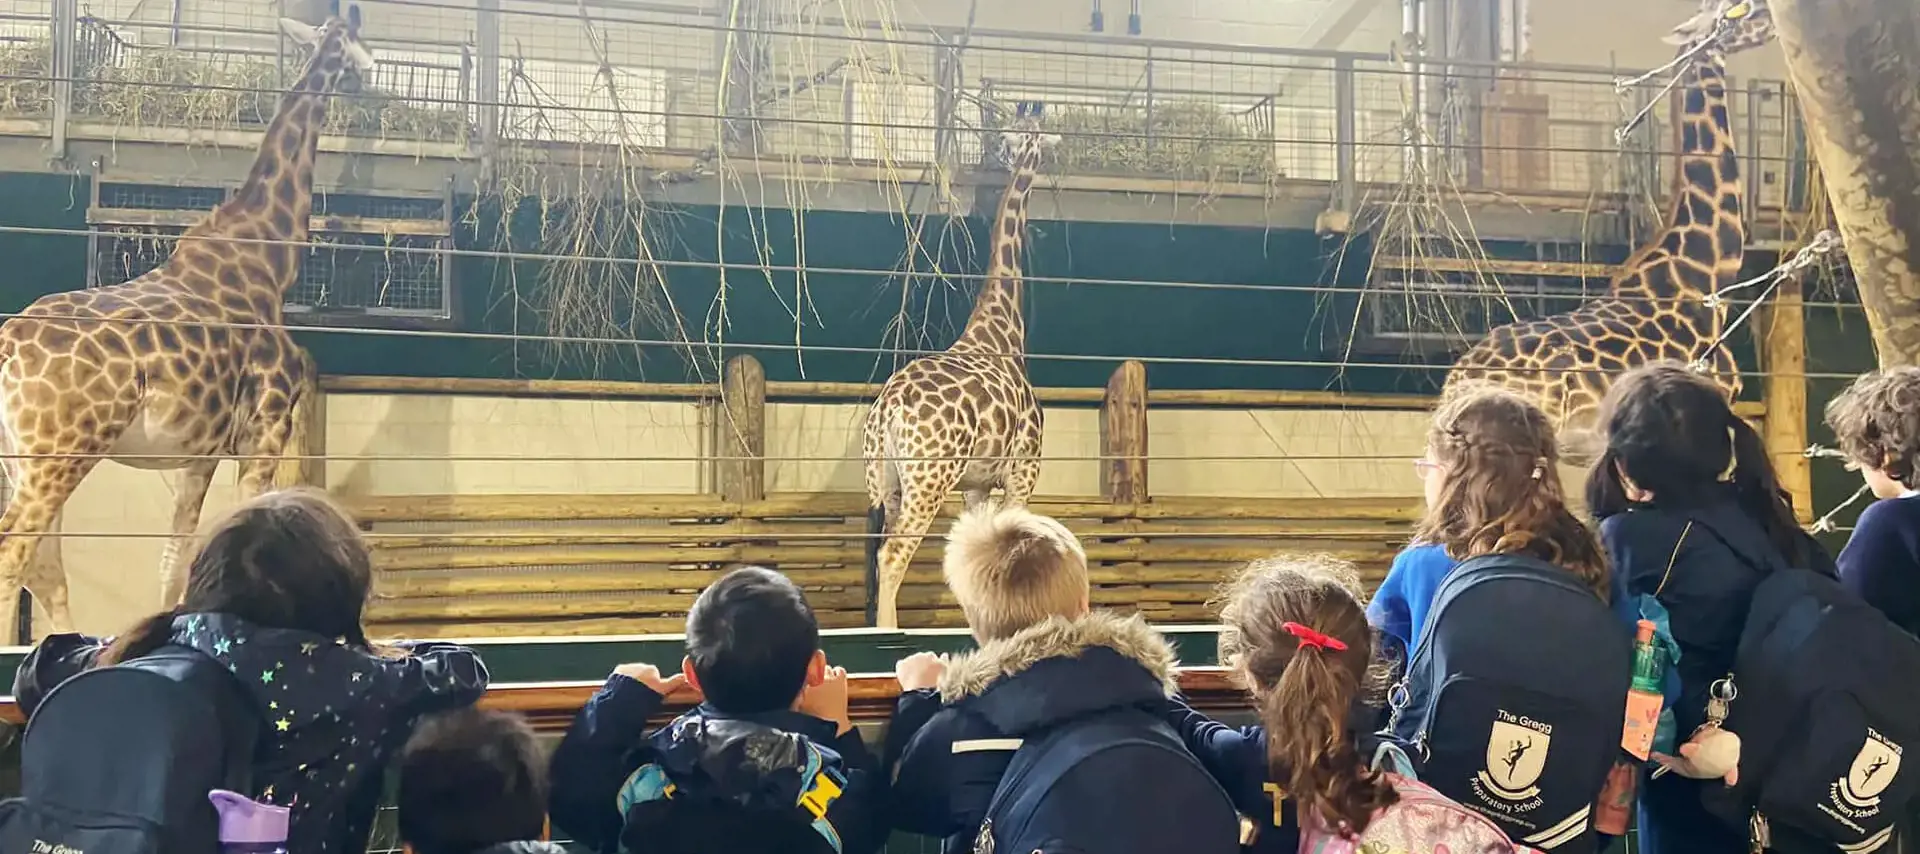 Prep pupils from The Greg Prep School on a visit to the Zoo